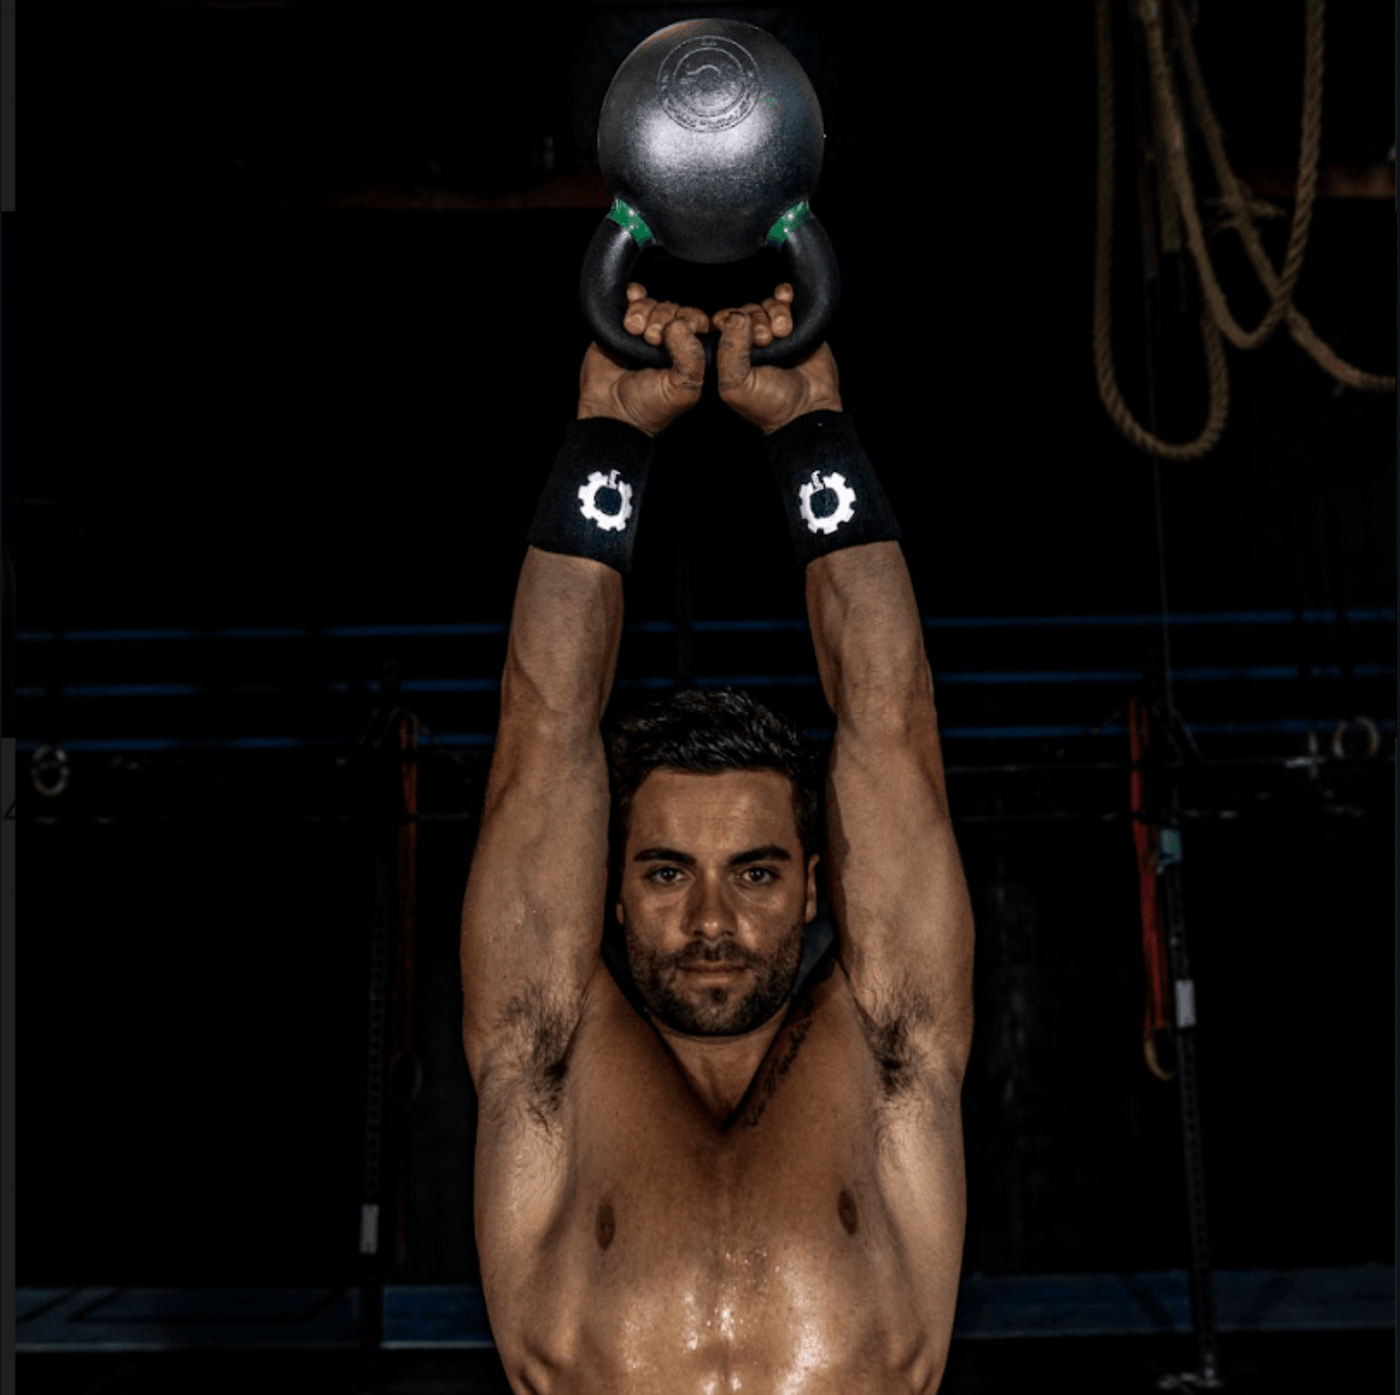 Kettlebell Wrist Guards By Industrial Athletic